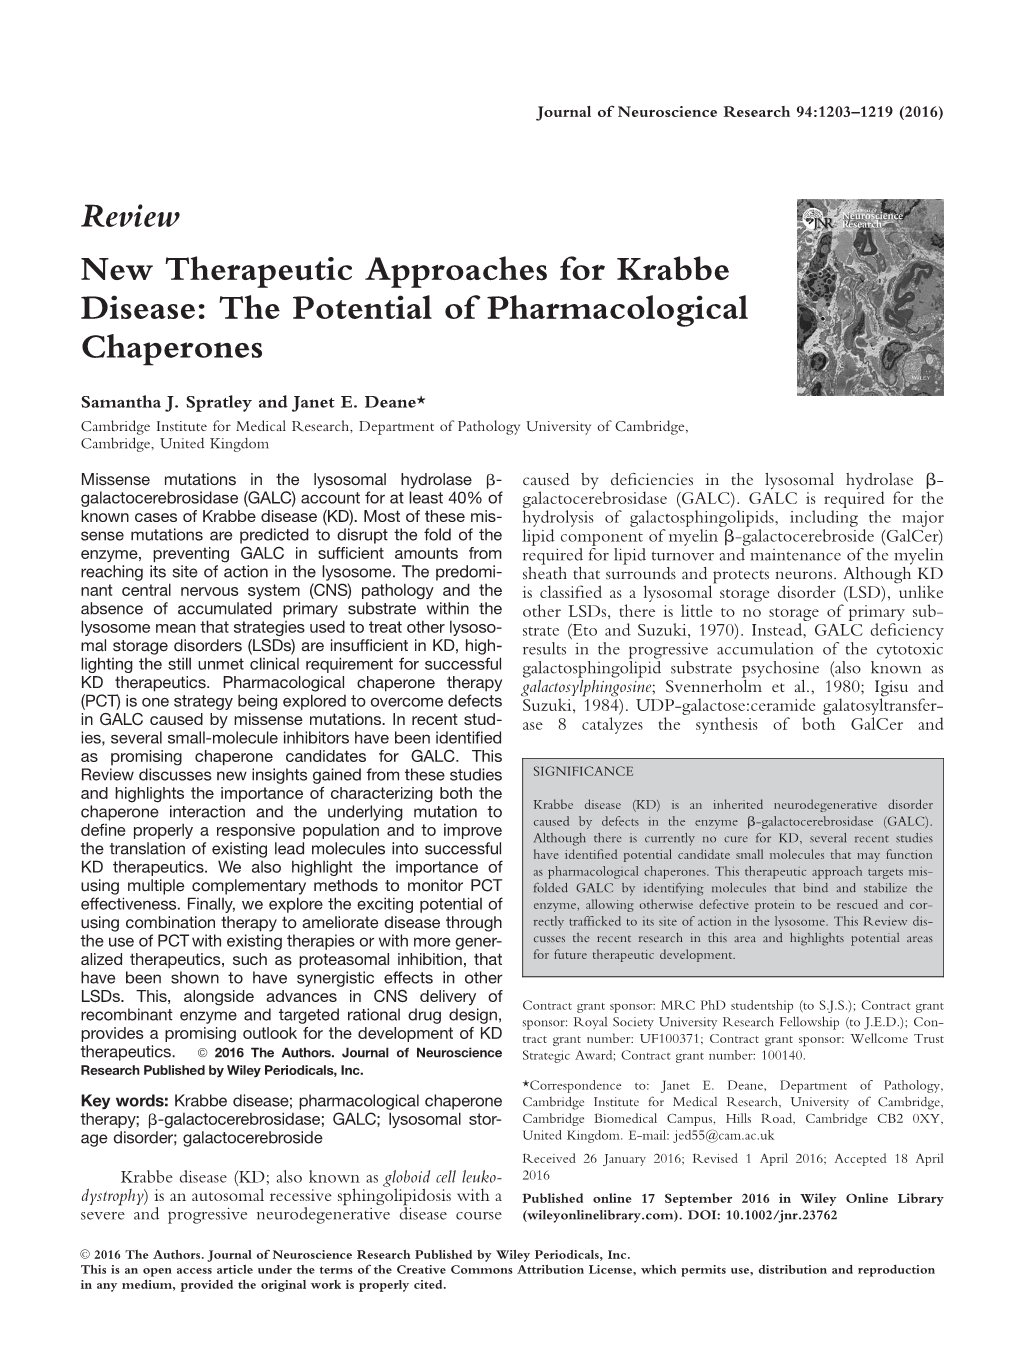 New Therapeutic Approaches for Krabbe Disease: the Potential of Pharmacological Chaperones